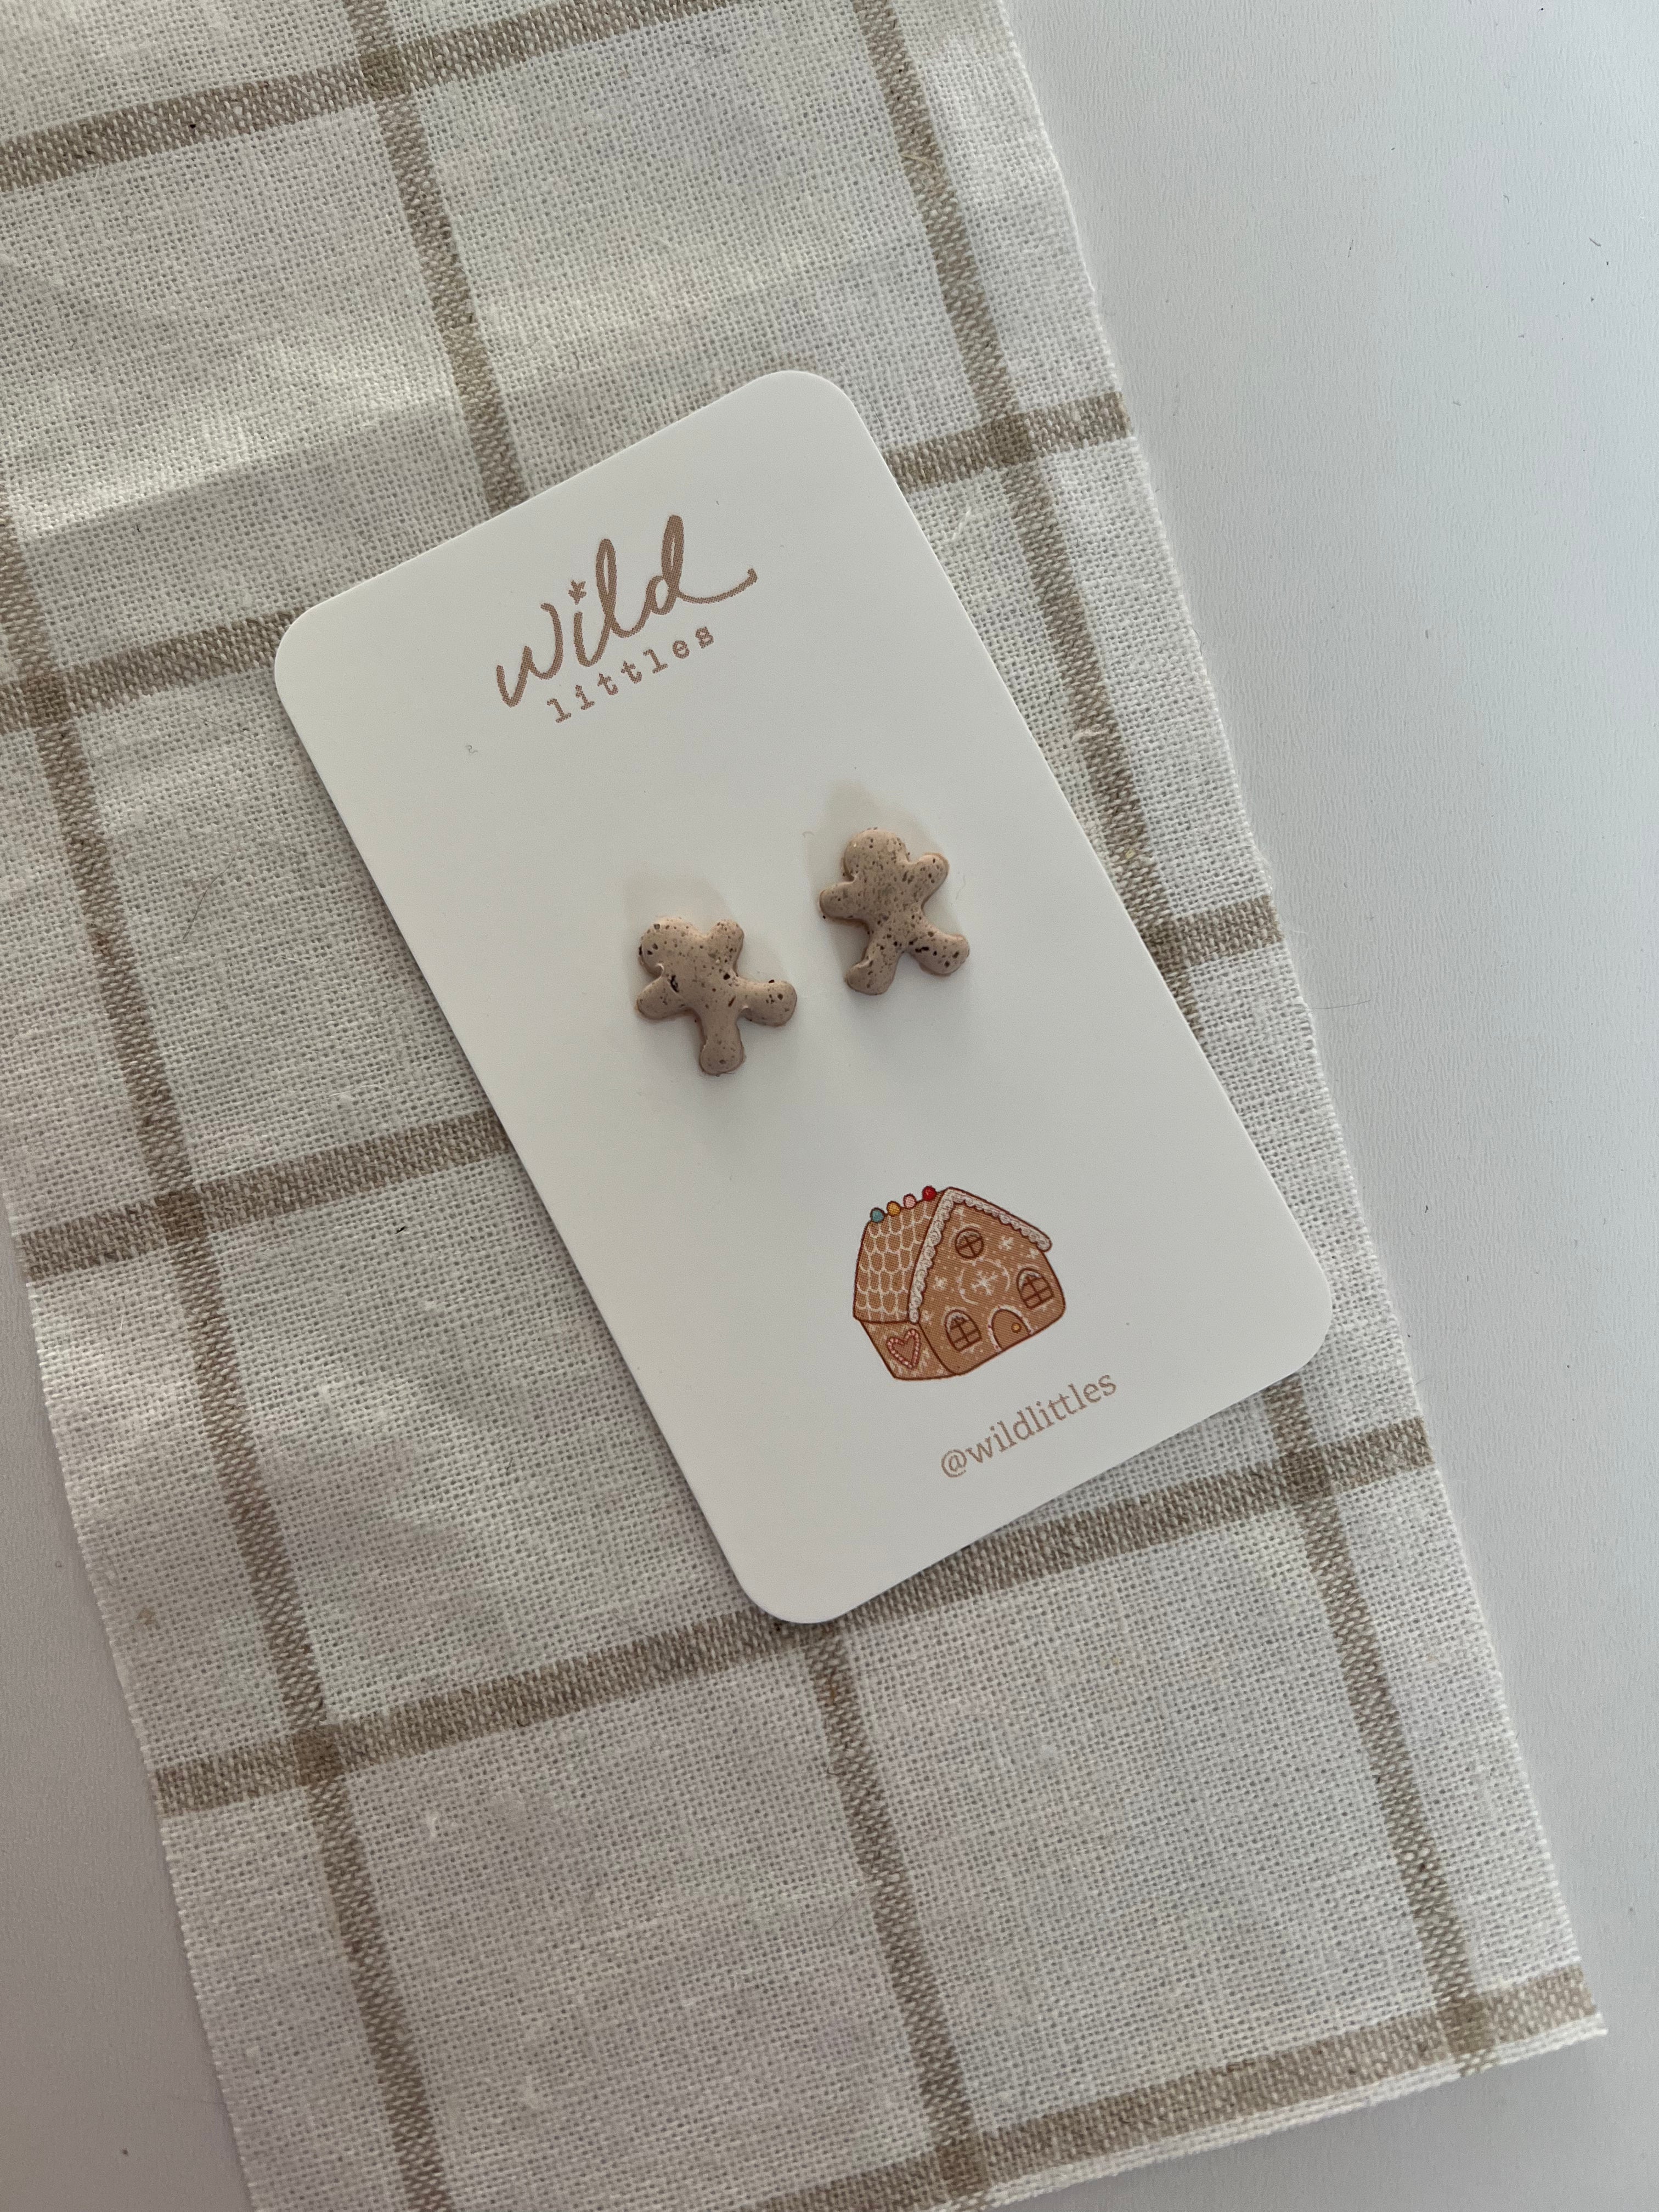 holiday earrings - gingerbread speckled pepper | Wild LIttles